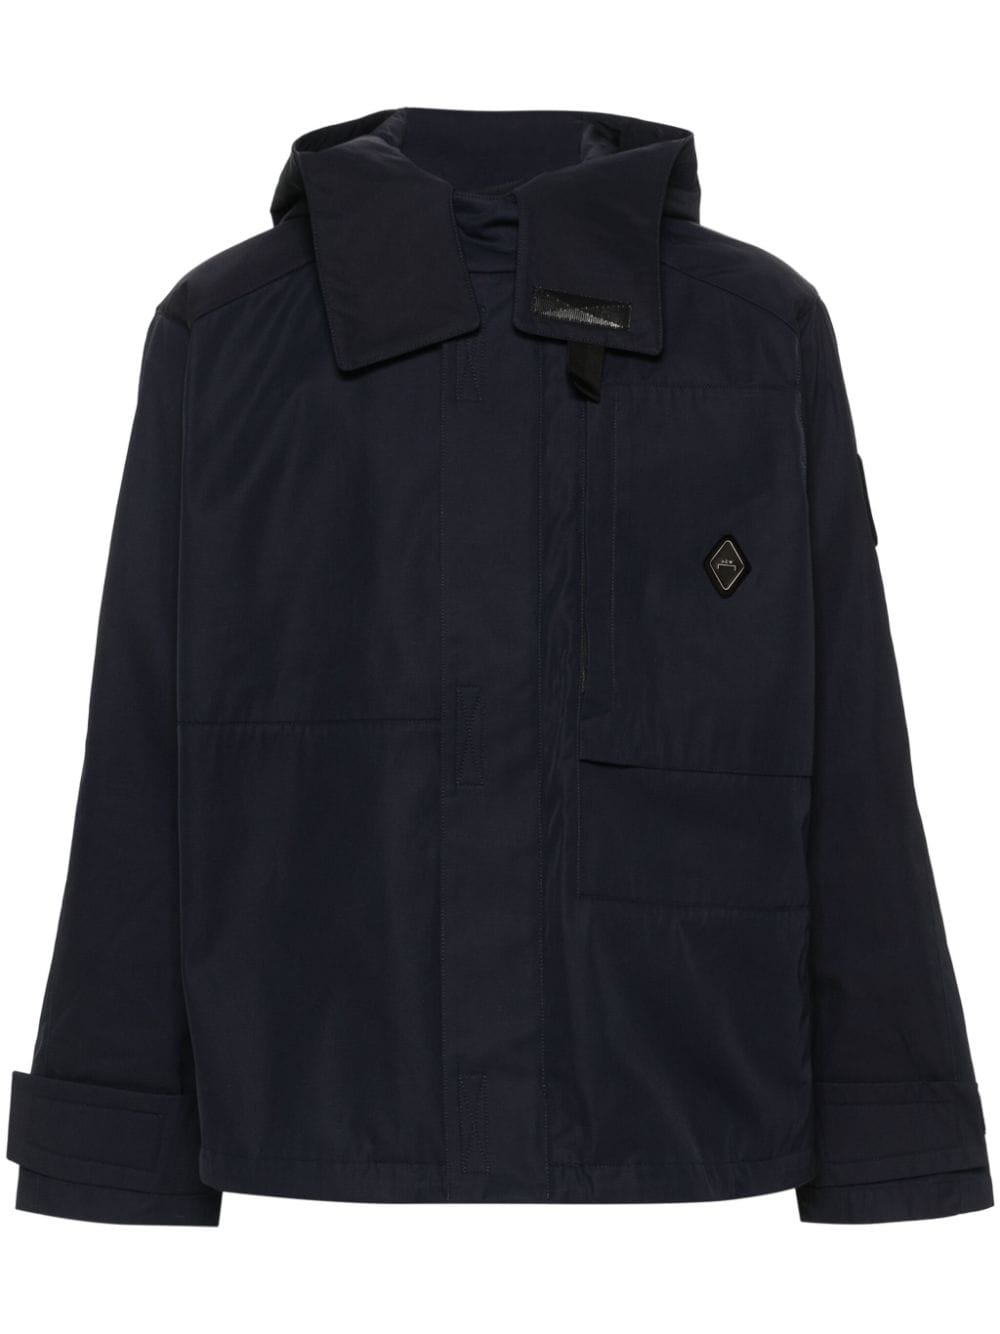 A-COLD-WALL* Gable Storm jacket - Blue von A-COLD-WALL*